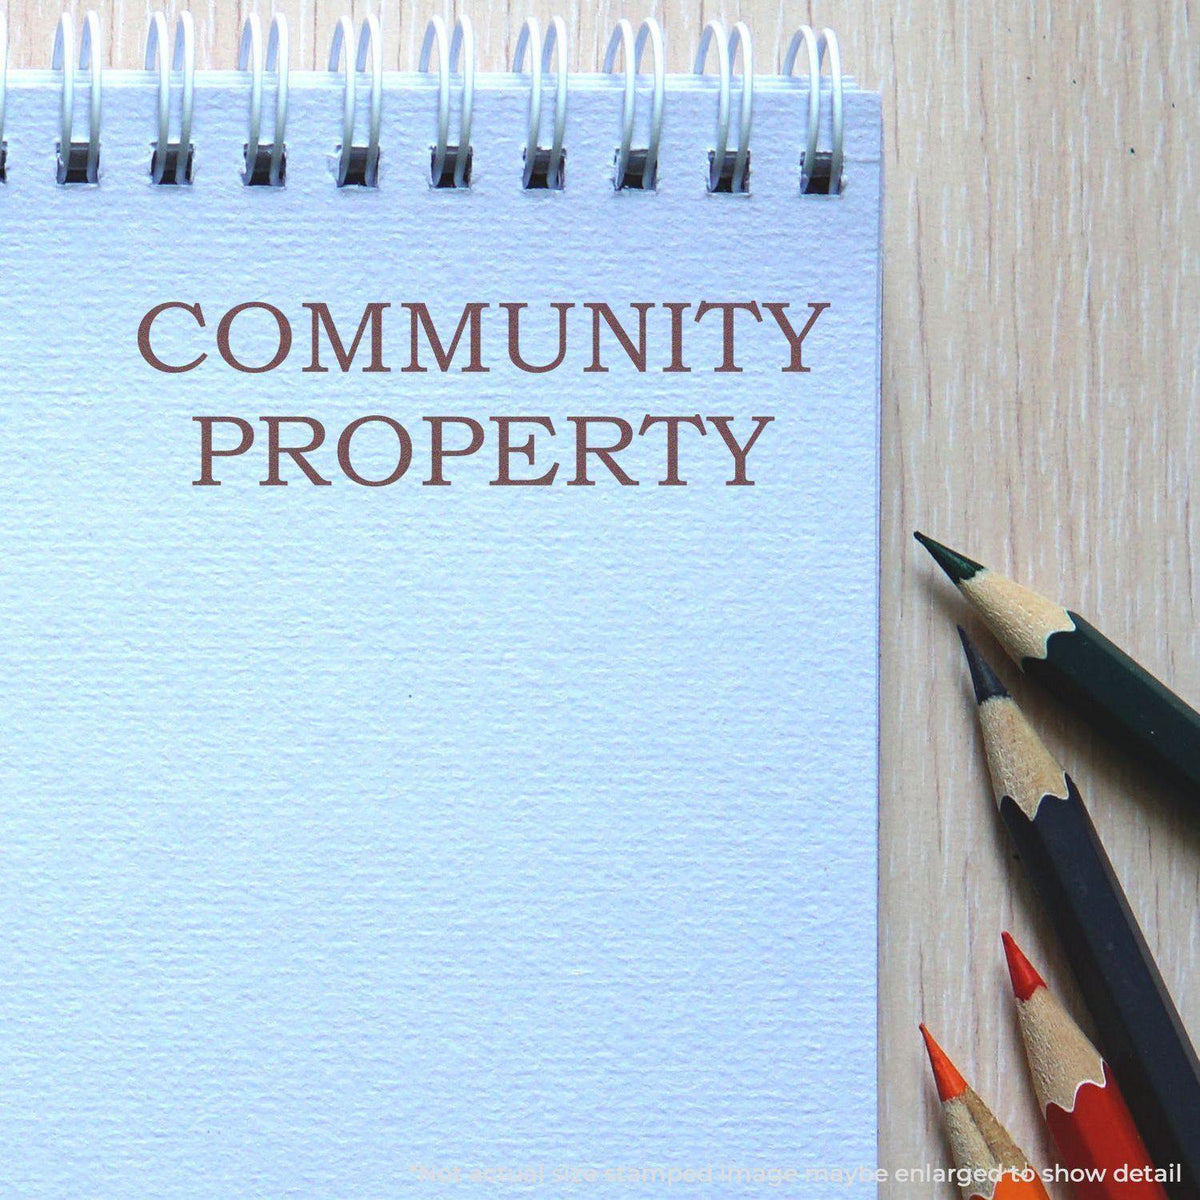 In Use Community Property Rubber Stamp Image